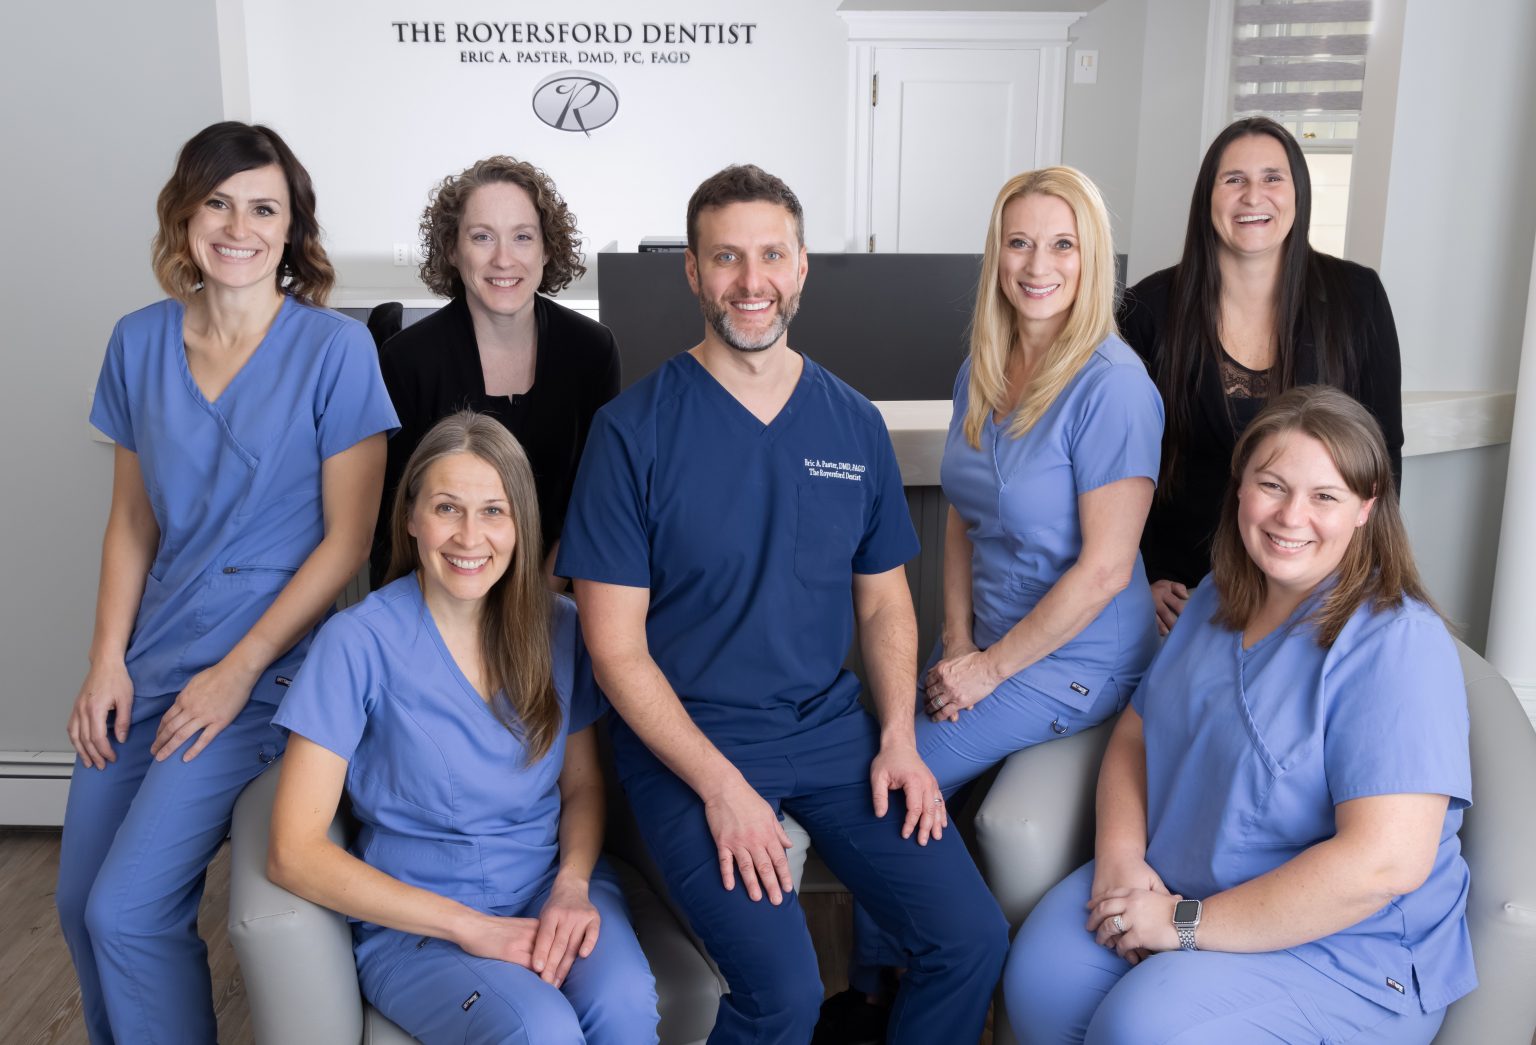 Dr. Eric Paster - The Royersford Dentist